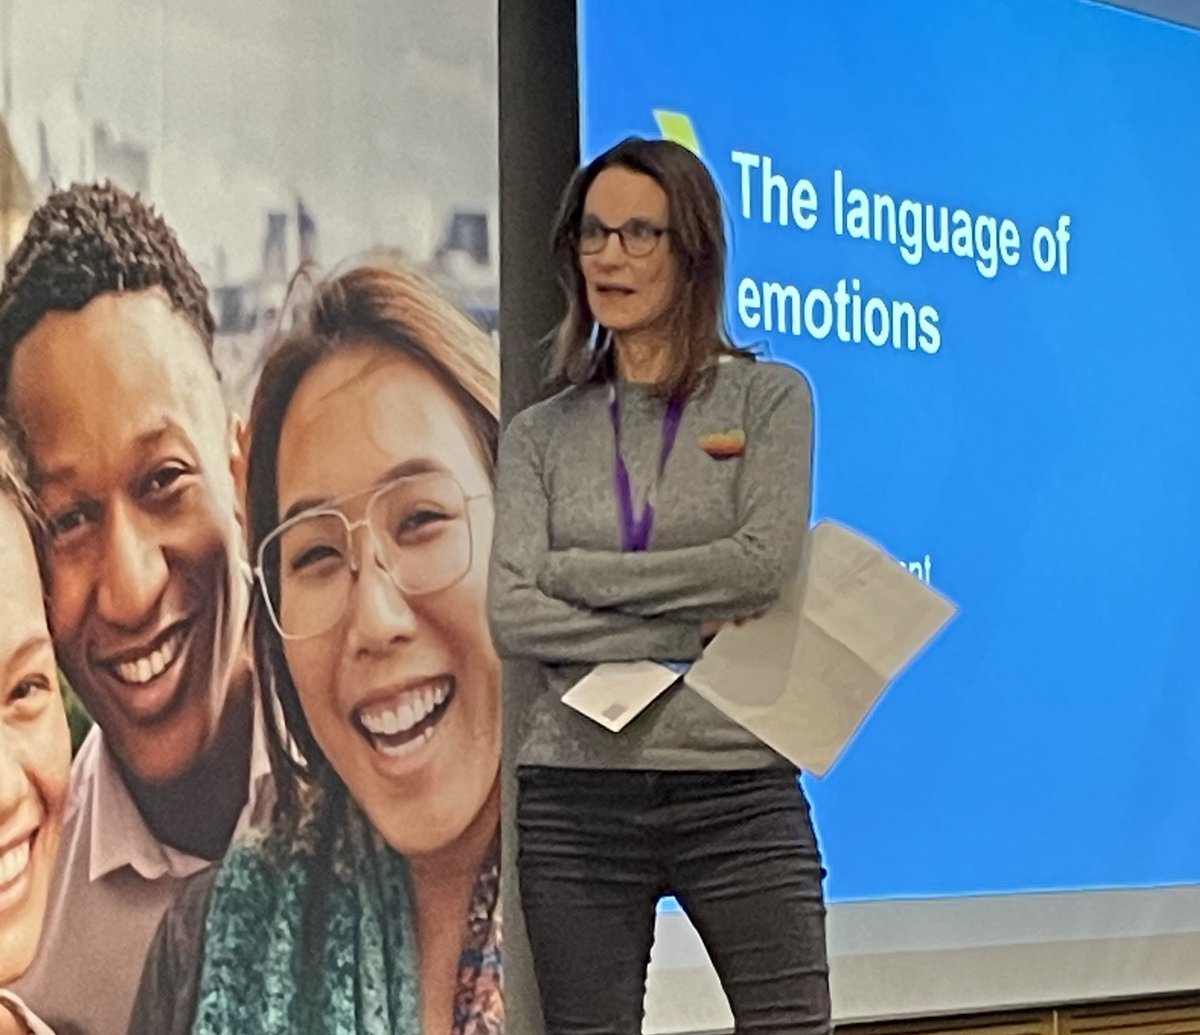 Susie Dent, our final #ELTconference speaker, takes a deep dive into the language of emotions. Did we feel boredom before Dickens used the word? “There are so many complexities and if we can articulate them what power we have,” she said. #UKELT